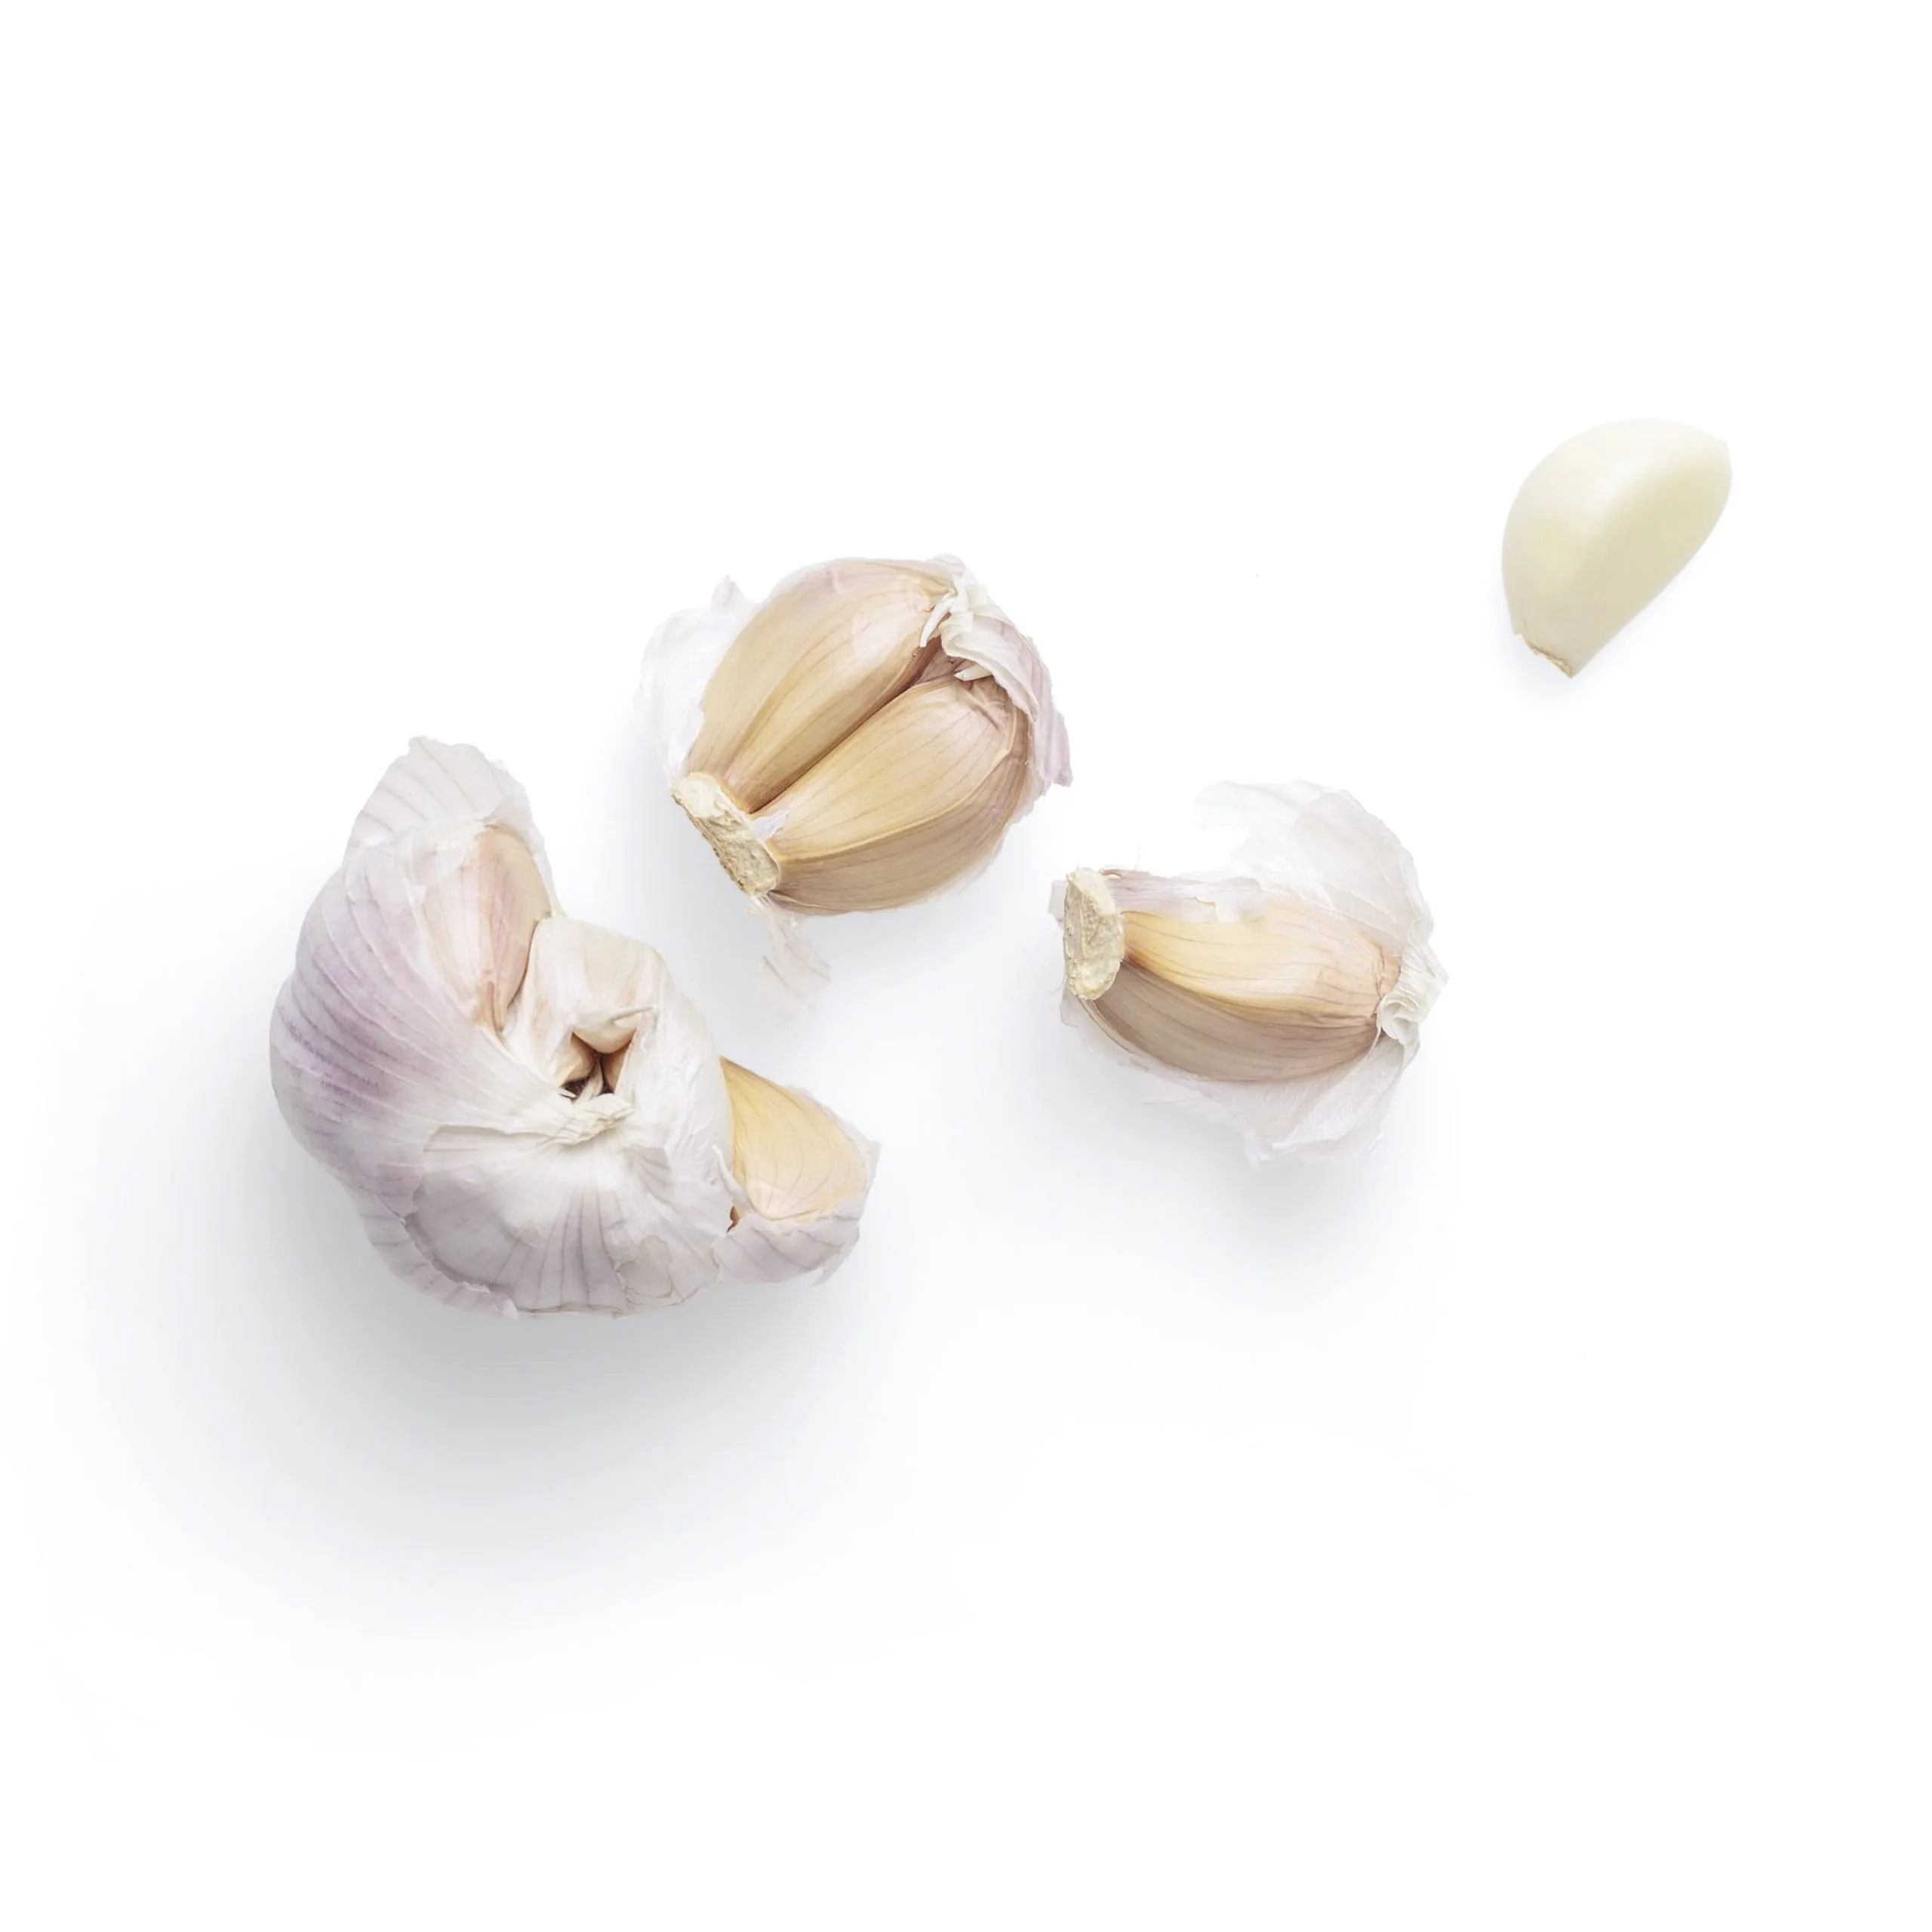 Here’s how garlic may hold the promise of weight control